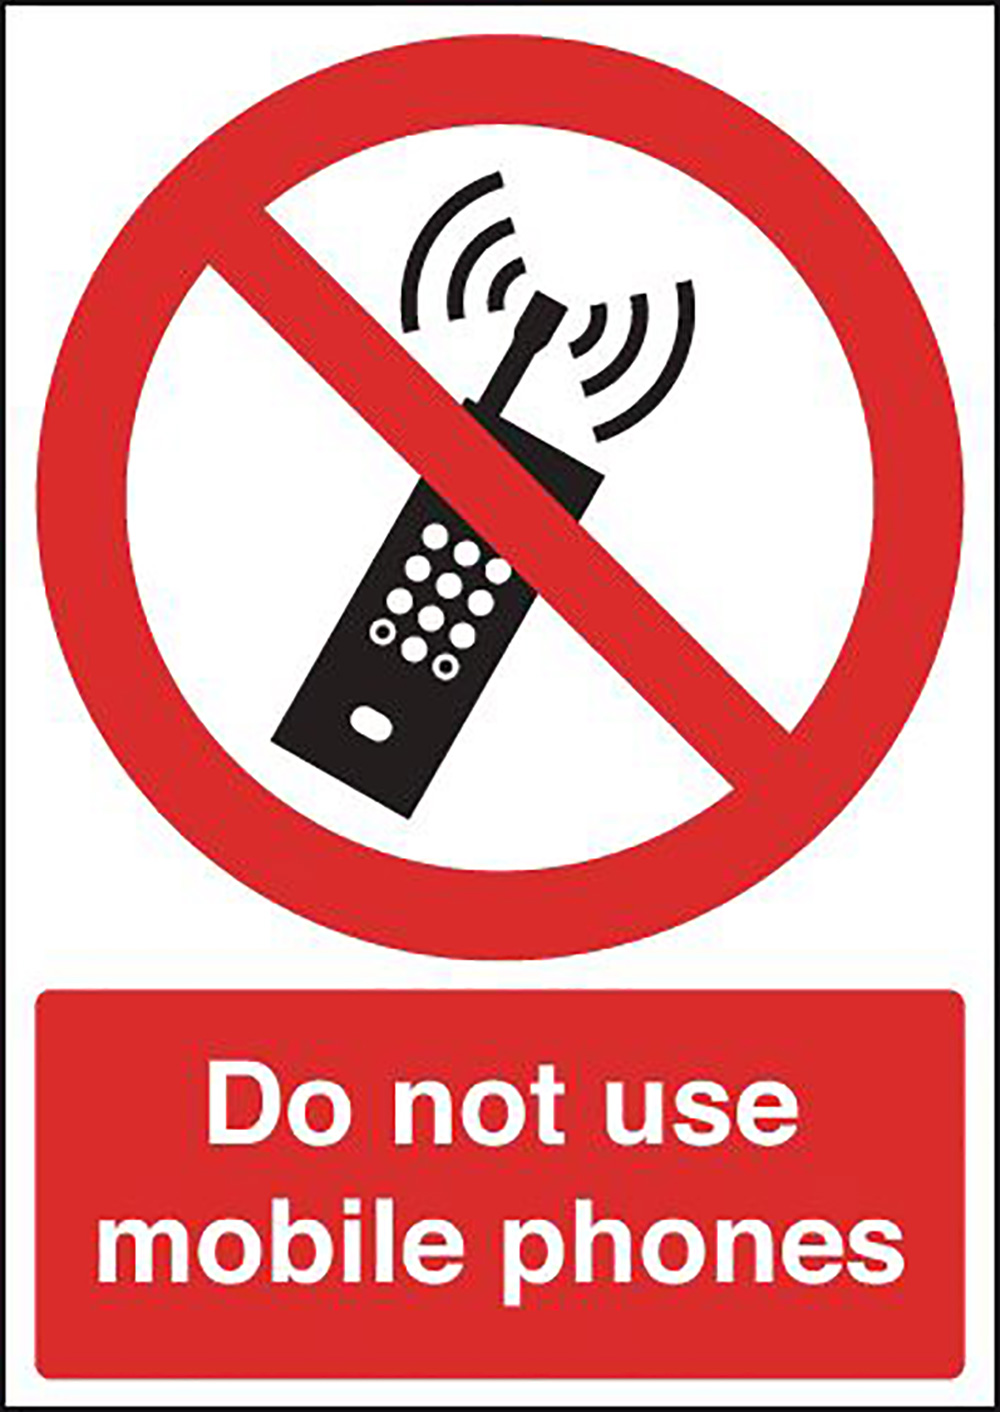 Do Not Use Mobile Phones  210x148mm Self Adhesive Vinyl Safety Sign  